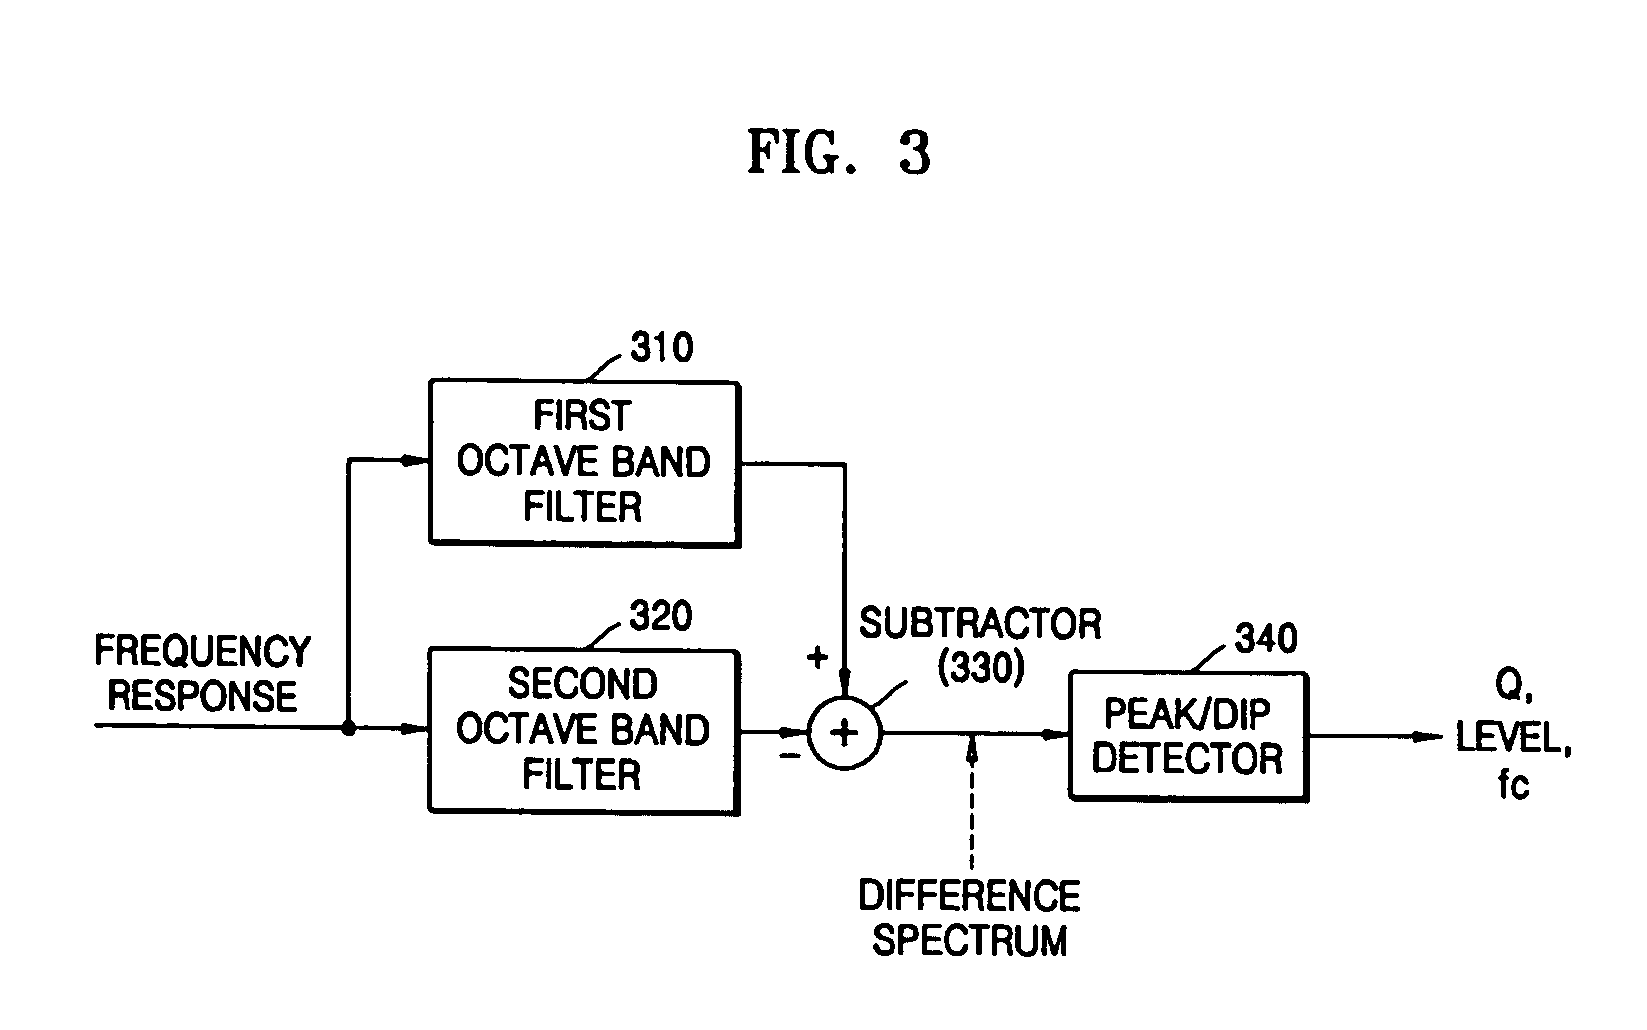 Method and apparatus to compensate for imperfections in sound field using peak and dip frequencies